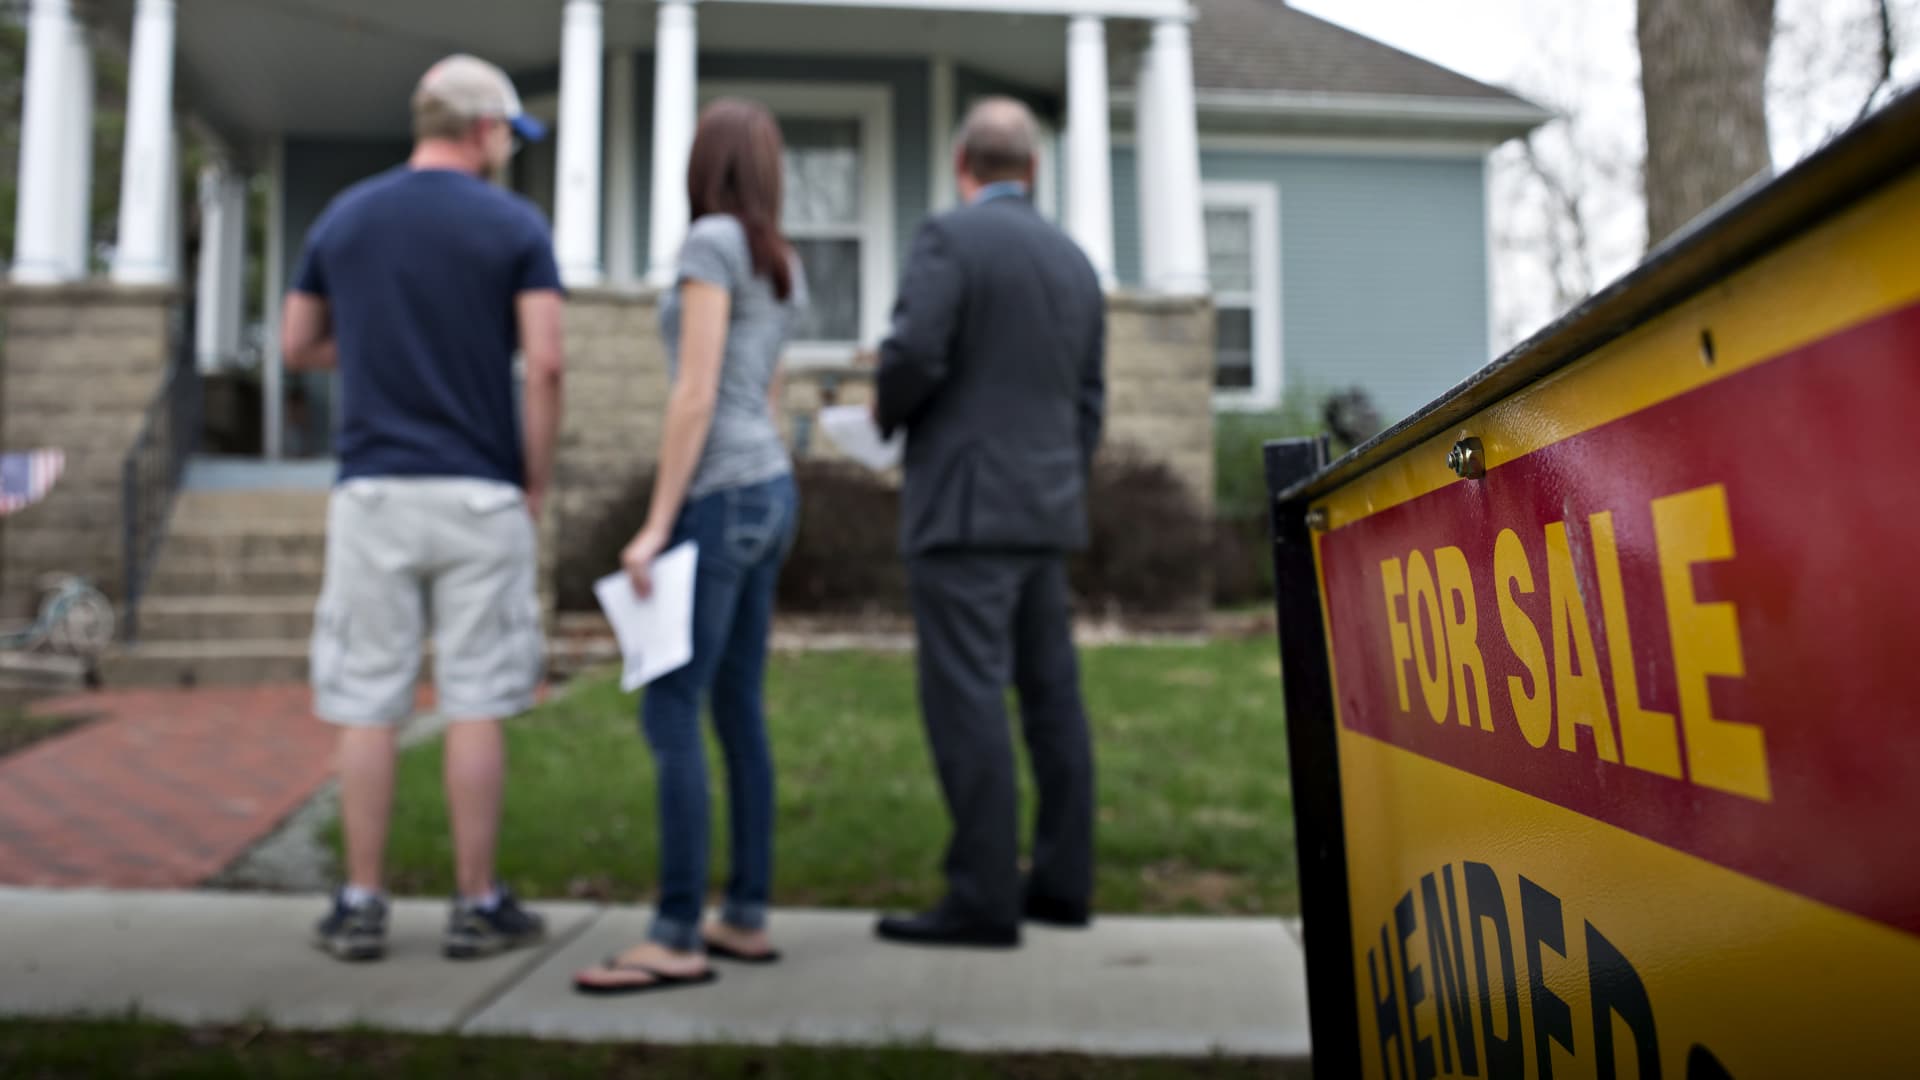 Jobs, home prices, market volatility are client concerns, advisors say